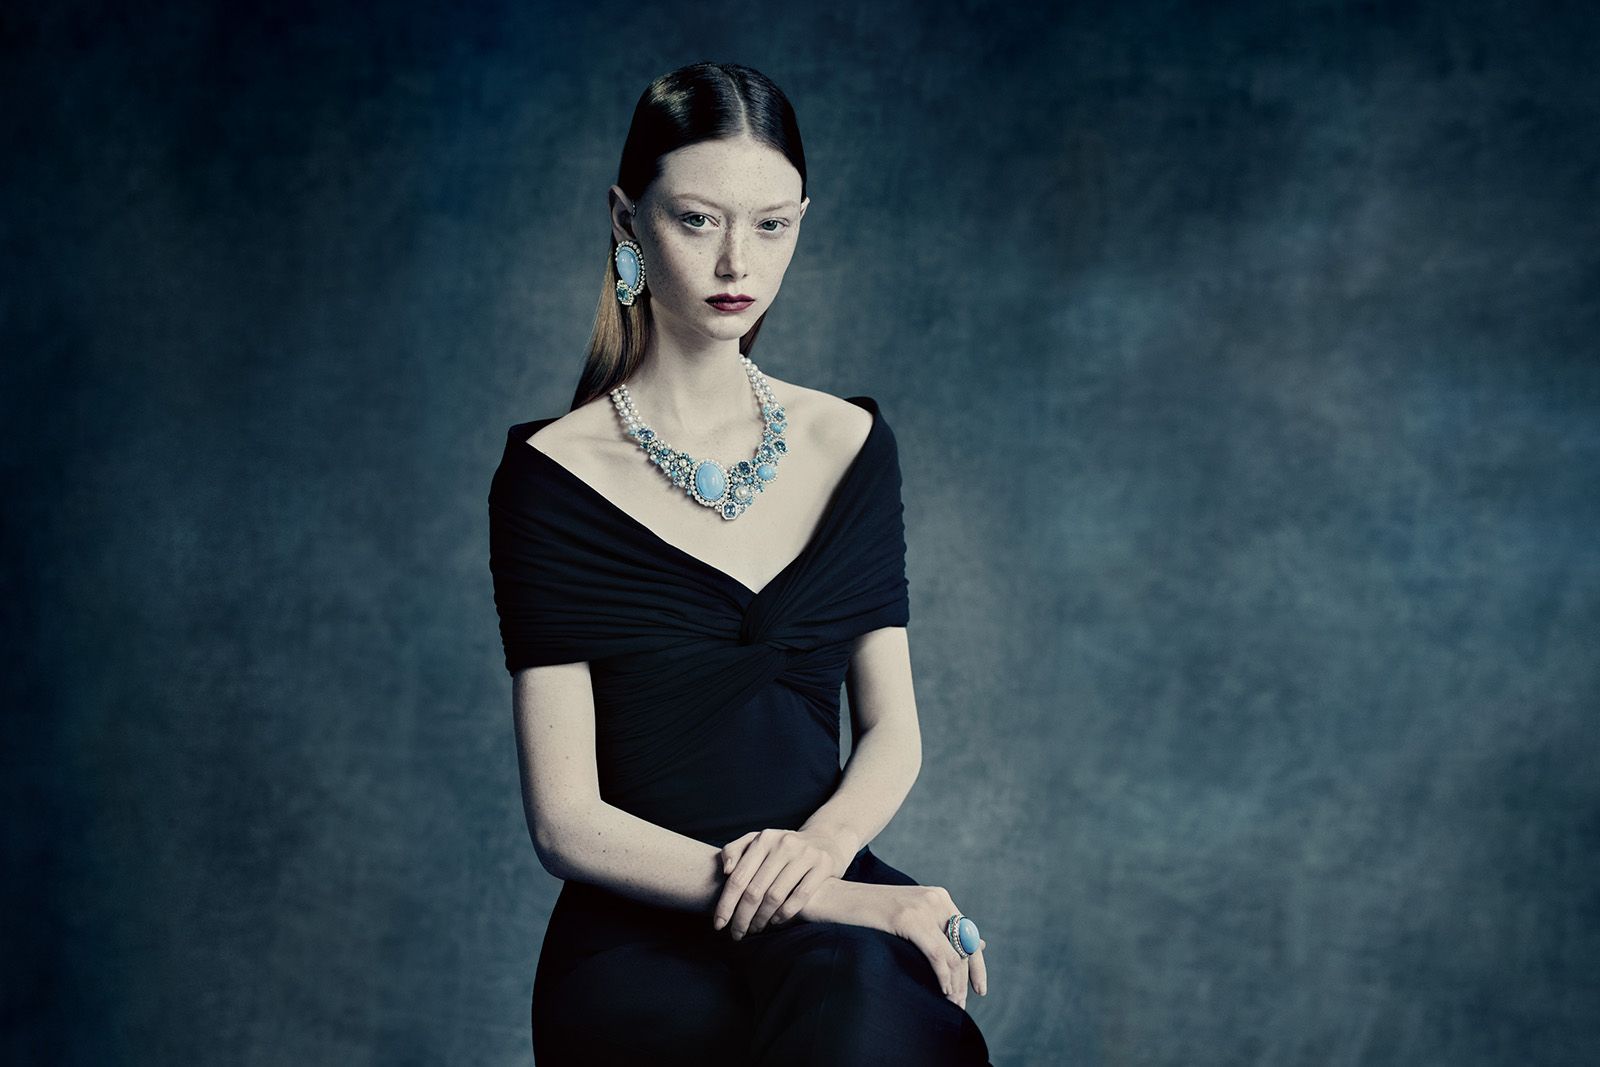 A model wears the Radiant necklace, earring and ring in campaign imagery for the new Tasaki Atelier Radiant Sky collection shot by Paolo Roversi